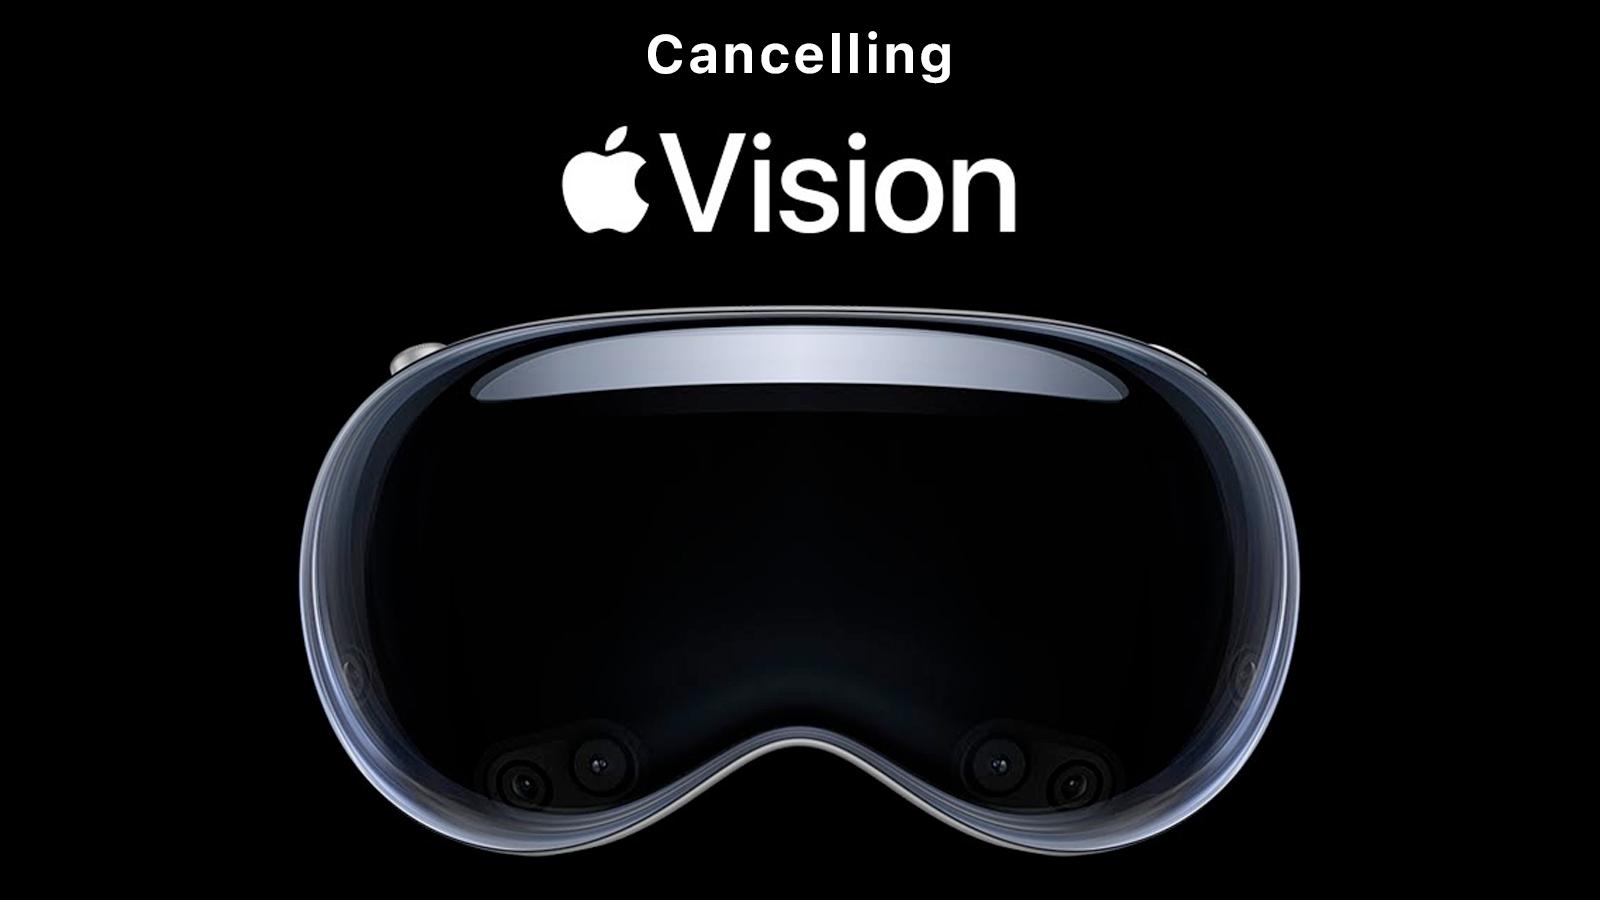 apple vision pro with text saying "cancelling vision"